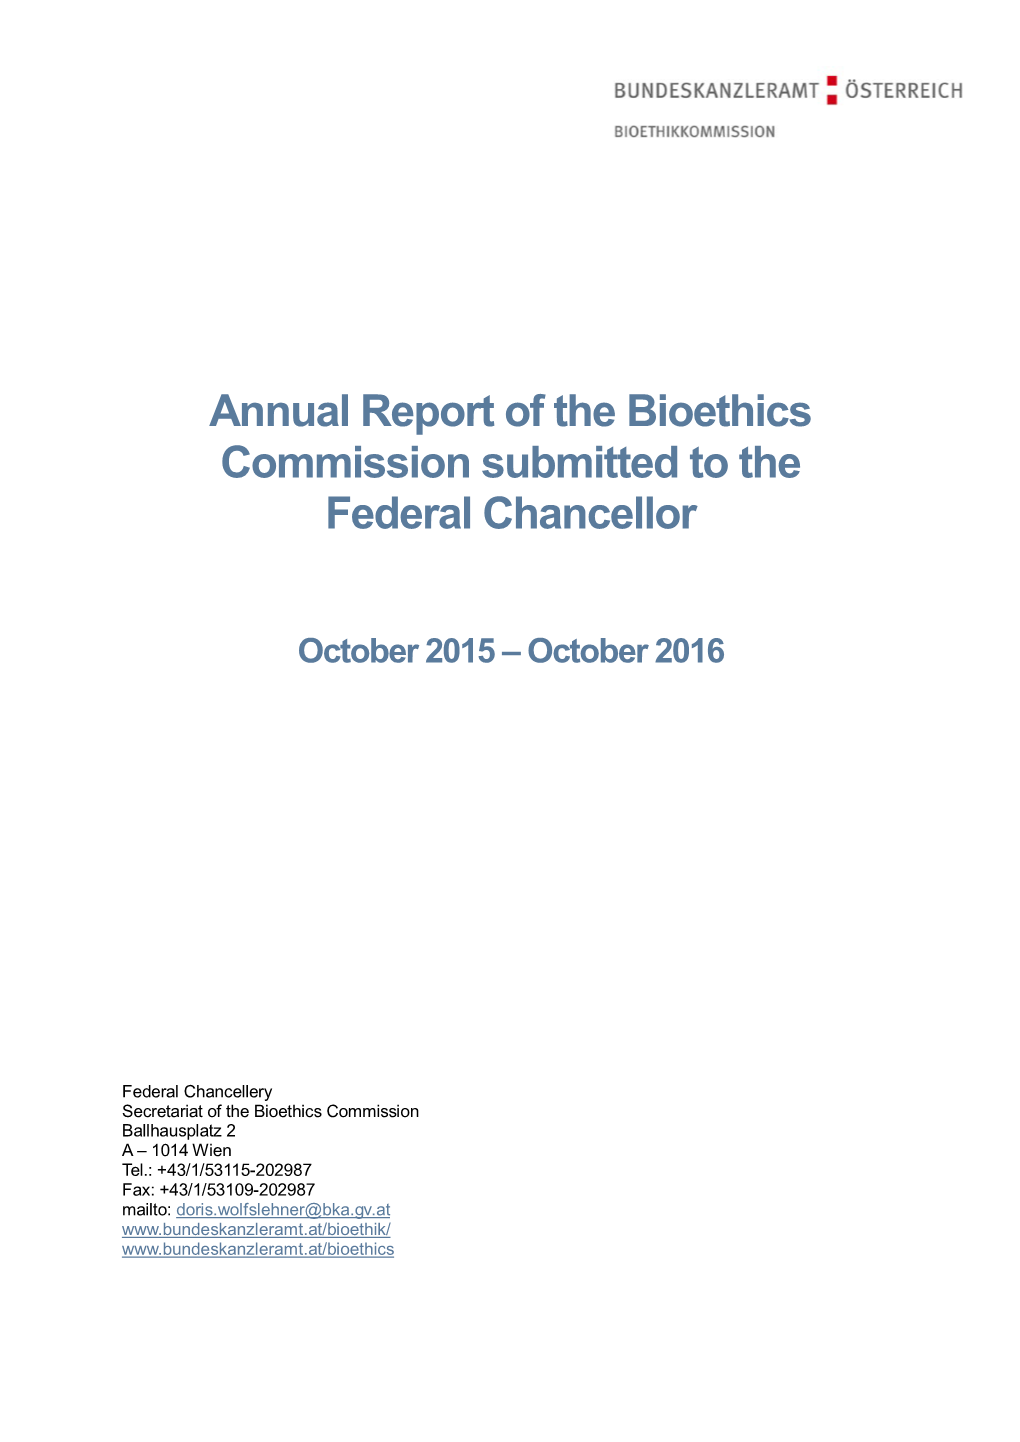 Annual Report of the Bioethics Commission Submitted to the Federal Chancellor